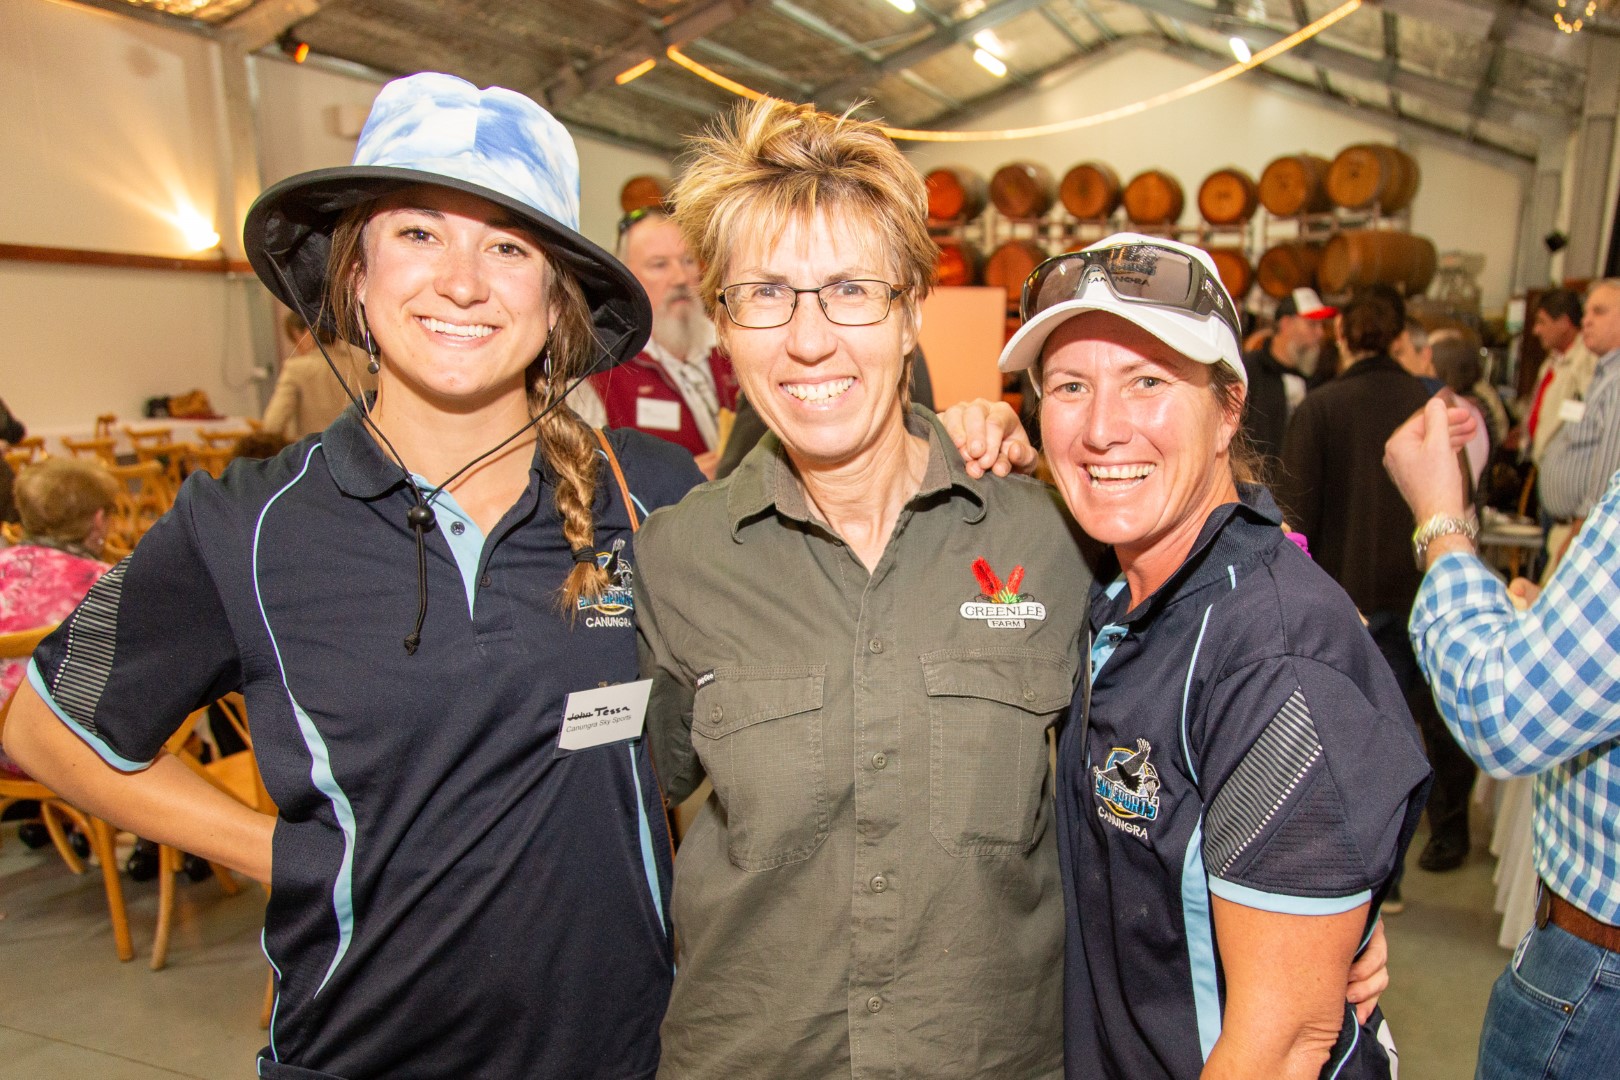 Robyn Lee of Greenlee Farm (centre), Tessa Taft and Lisa Bradley of Oz Paragliding and Hang Gliding.